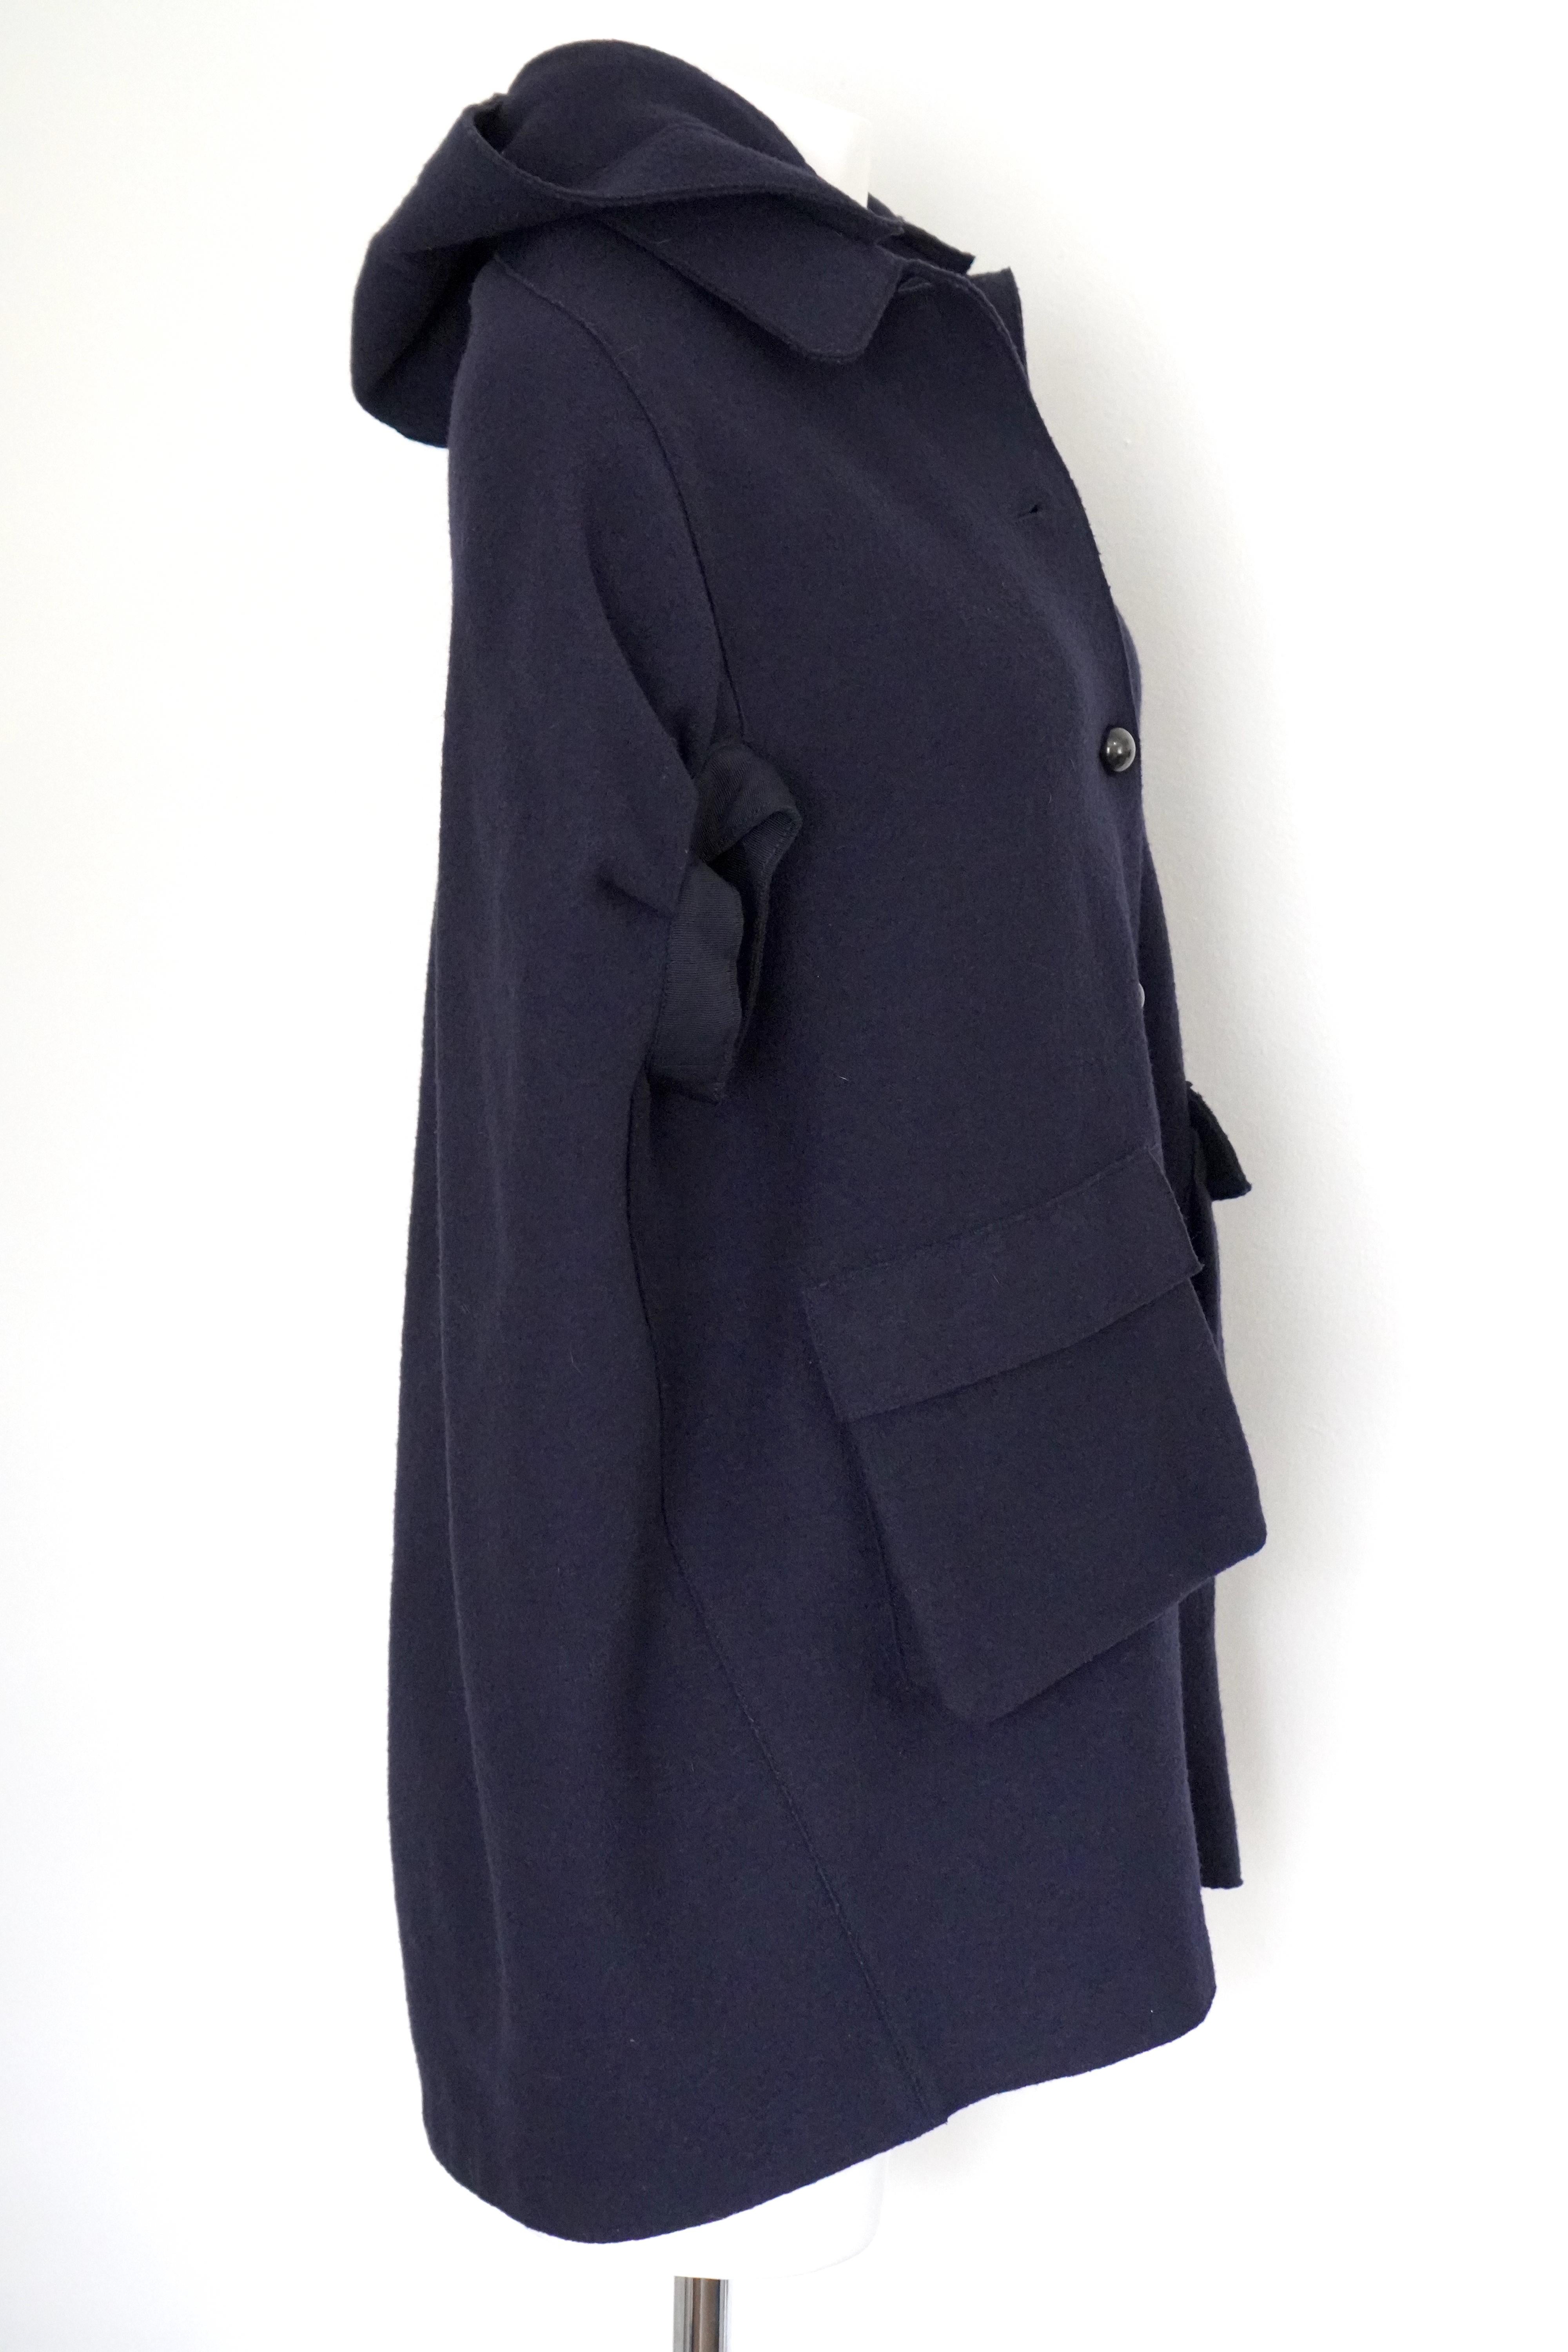 Lanvin Navy Hooded Cape Coat 
Made in: Italy
Fabric Material: 70% Wool, 20% Polyamide, 10% Cashmere
Removable hood
5 button closure 
No size tag